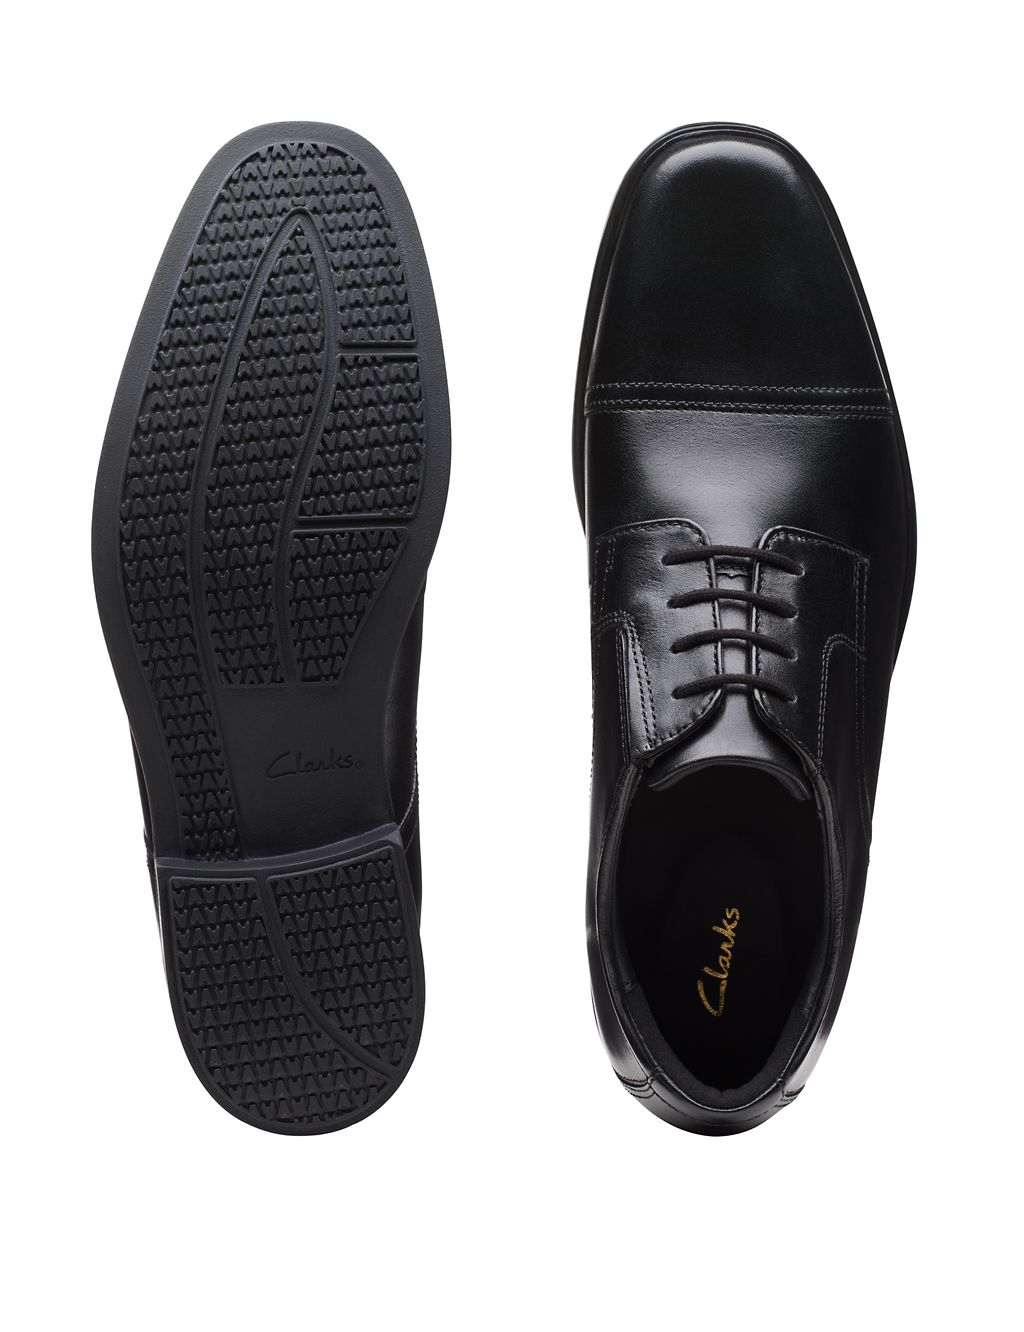 Wide Fit Leather Oxford Shoes 5 of 5